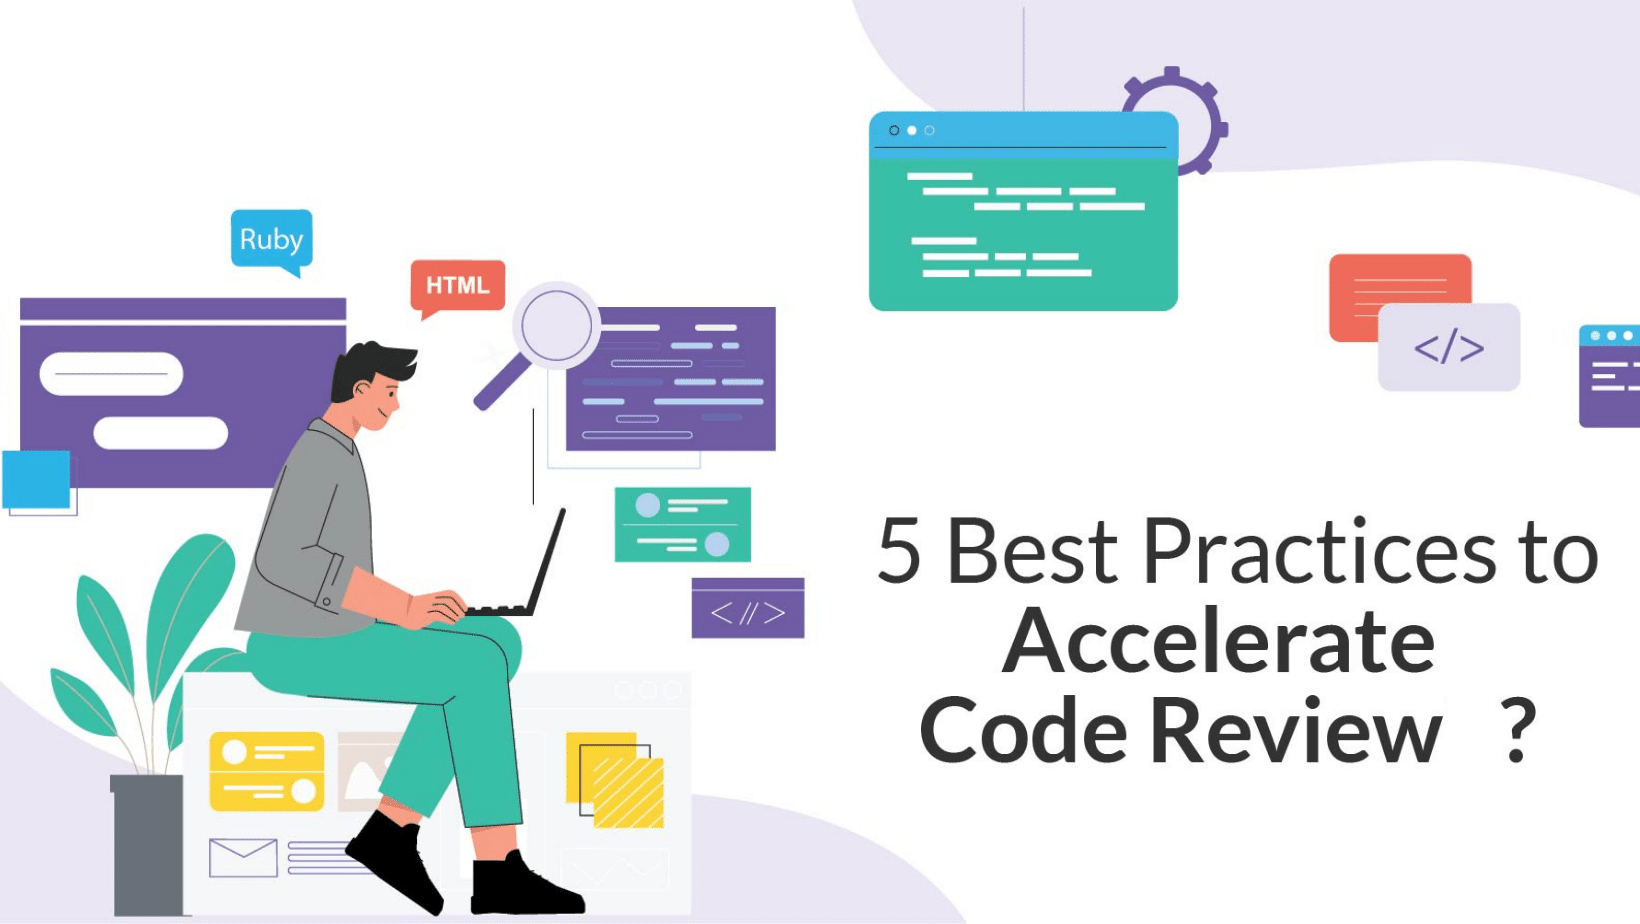 5 Best Practices to Accelerate Code Review